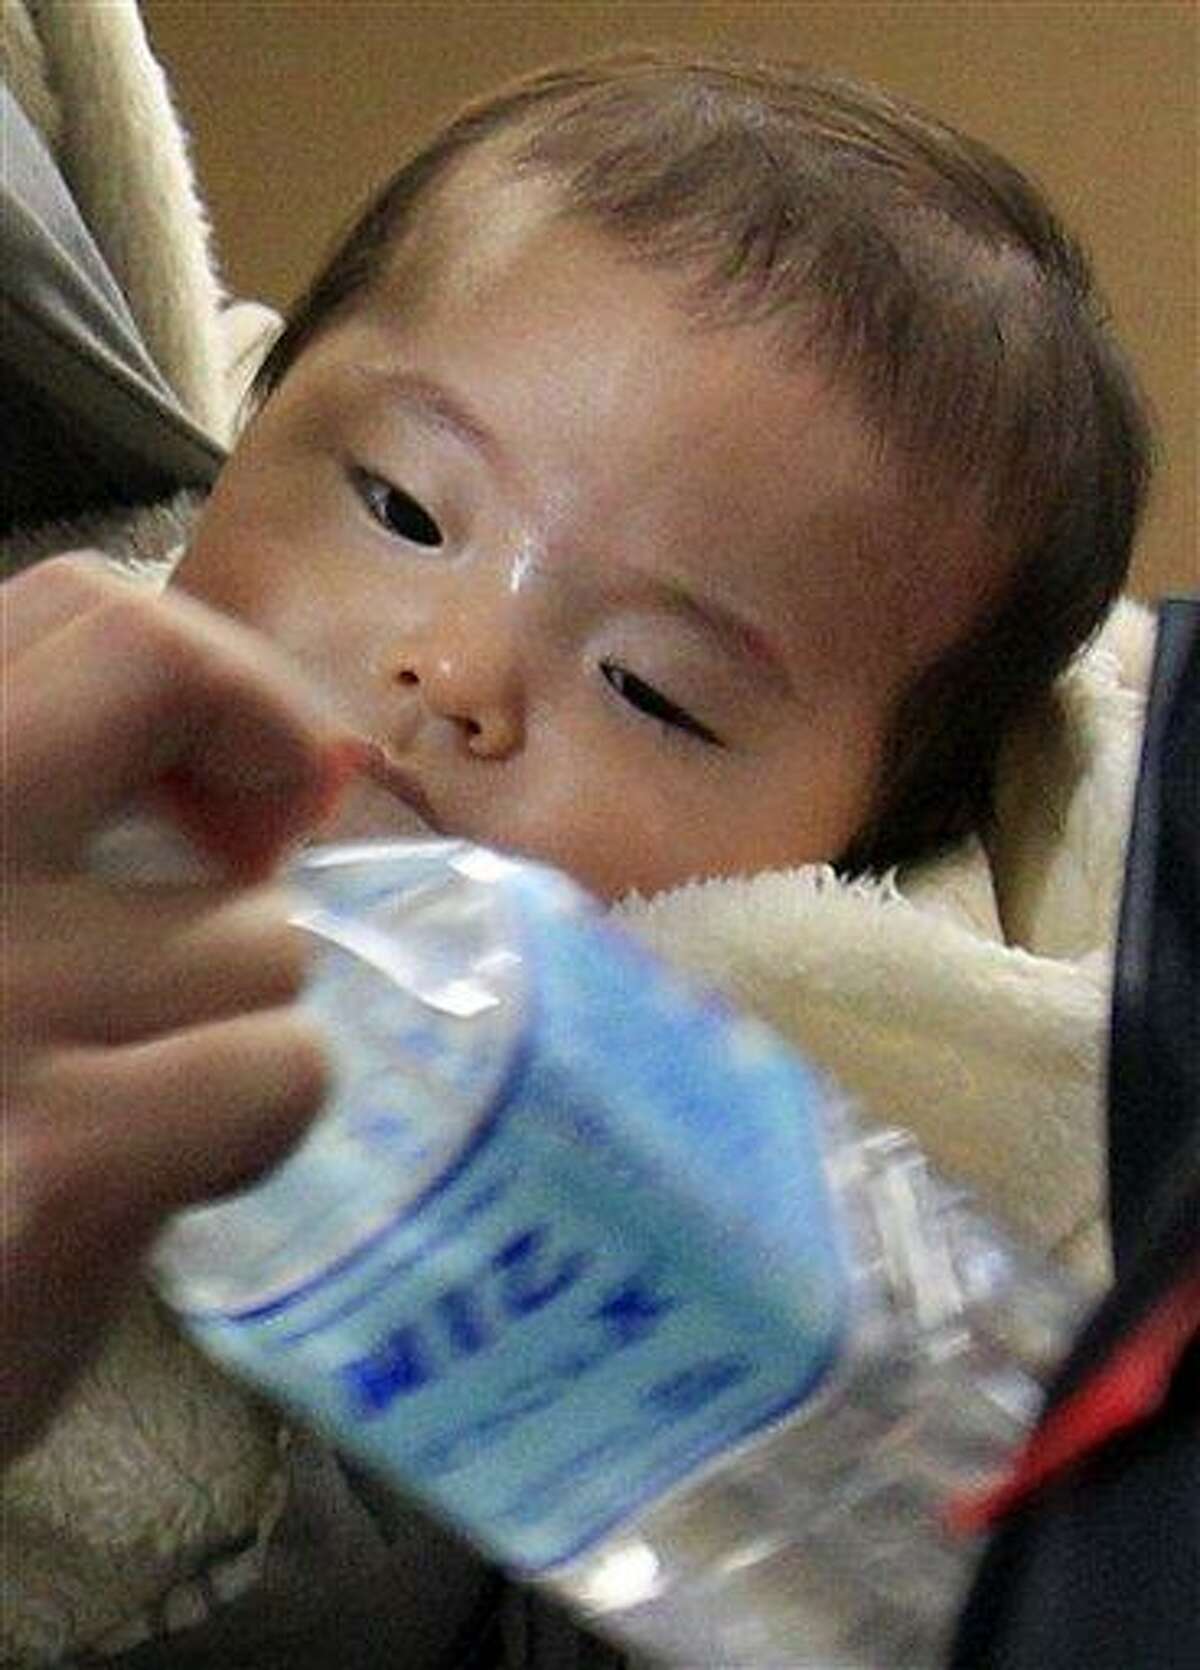 A baby looks at a bottled water as mother receives it at a ward office in Tokyo, Friday, March 25, 2011 as the Tokyo Metropolitan Government started on Thursday to distribute three small bottles of water each to an estimated 80,000 families with babies of 12 months or younger. (AP Photo/ Lee Jin-man)